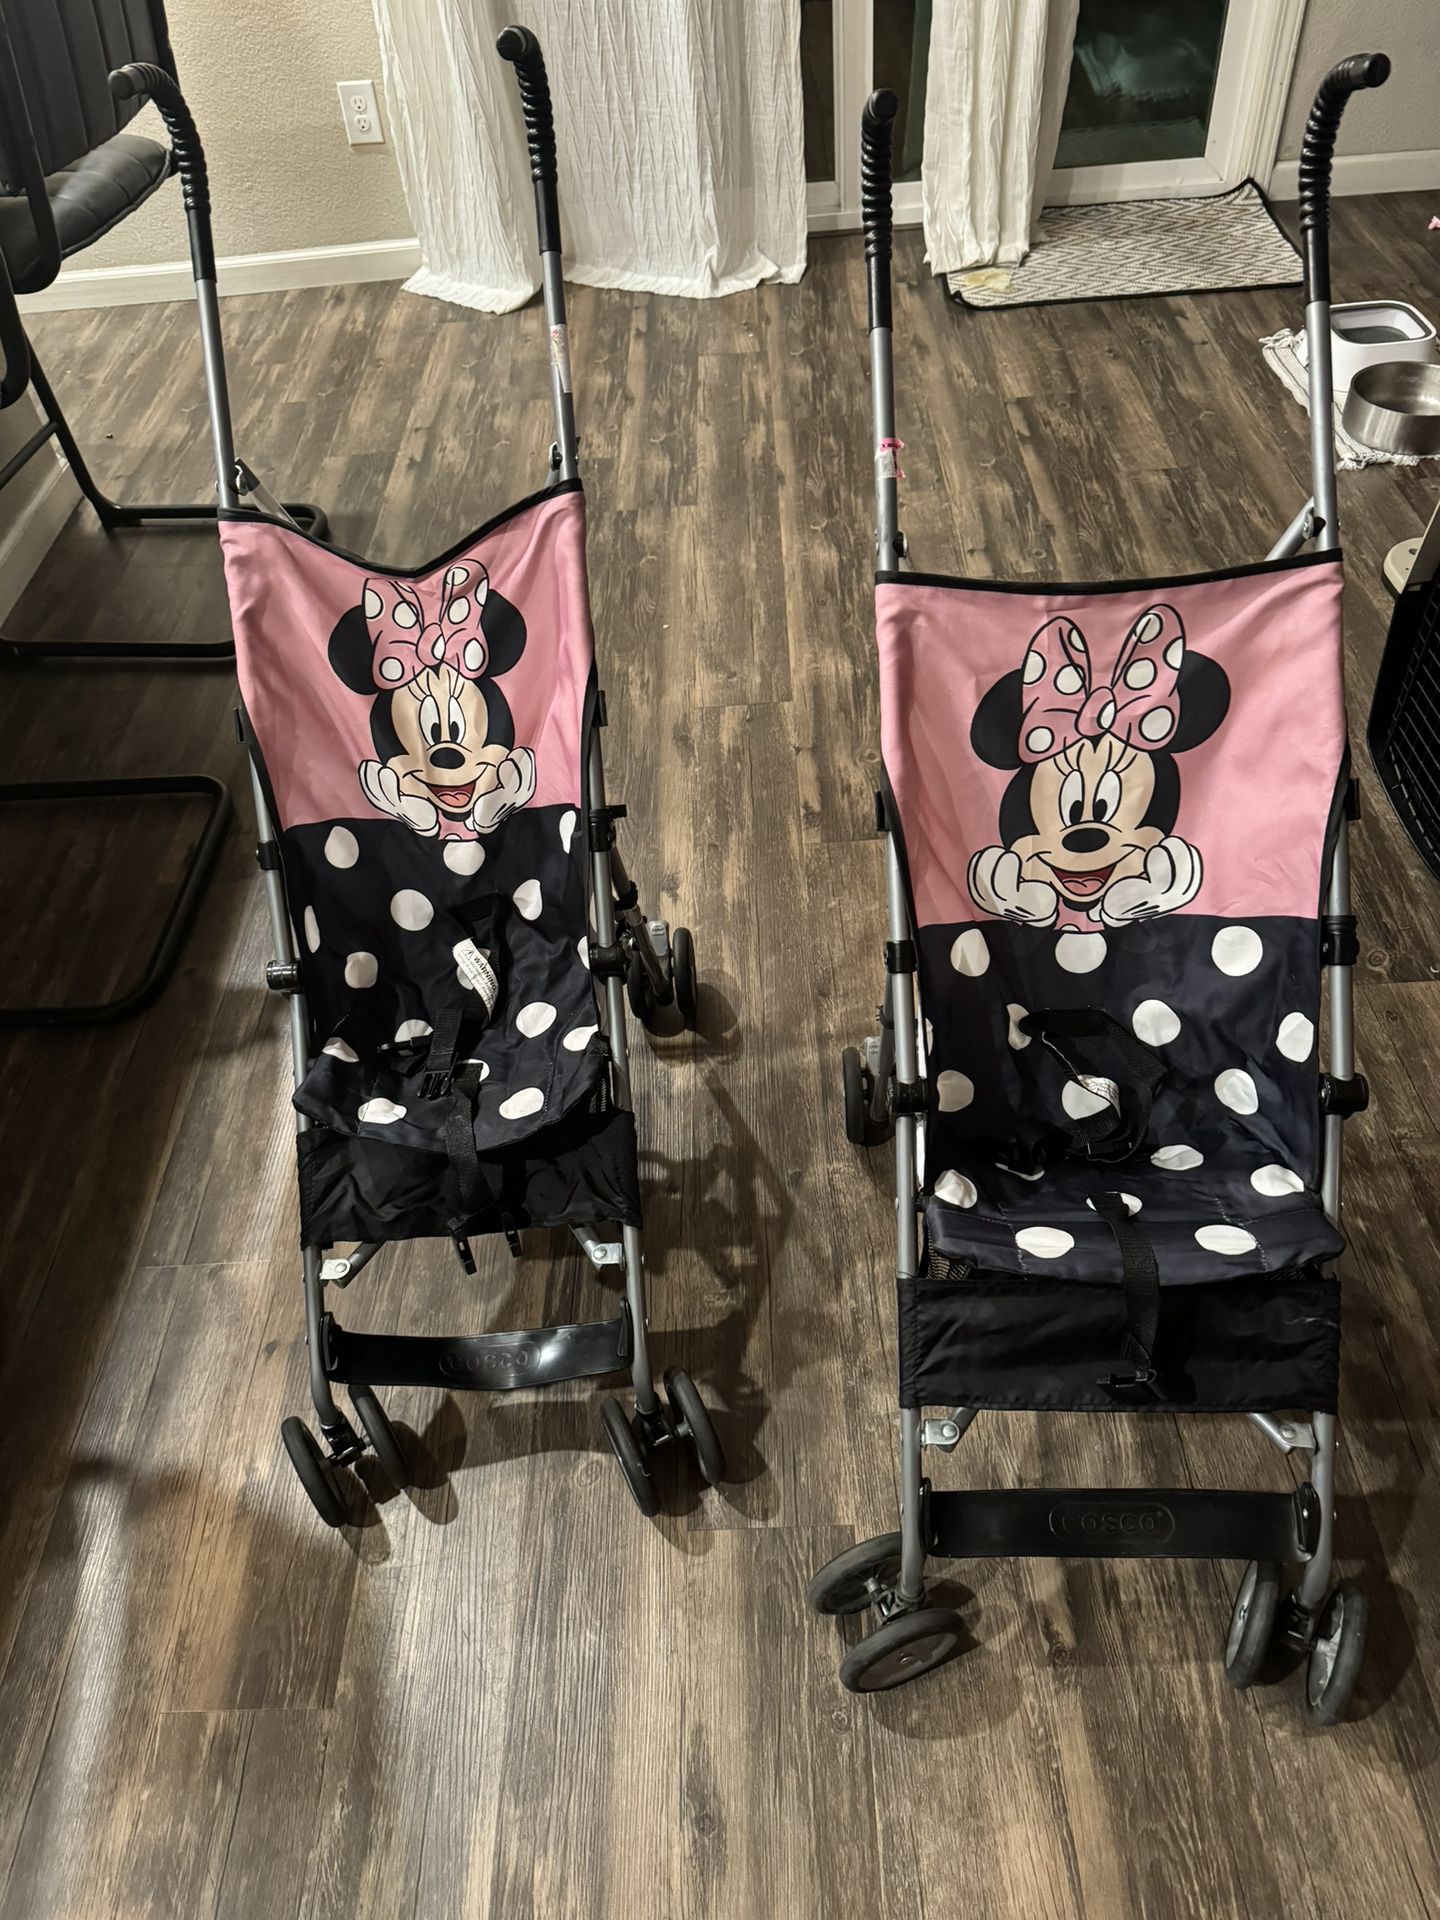 2 Minnie Mouse Strollers - Like New 